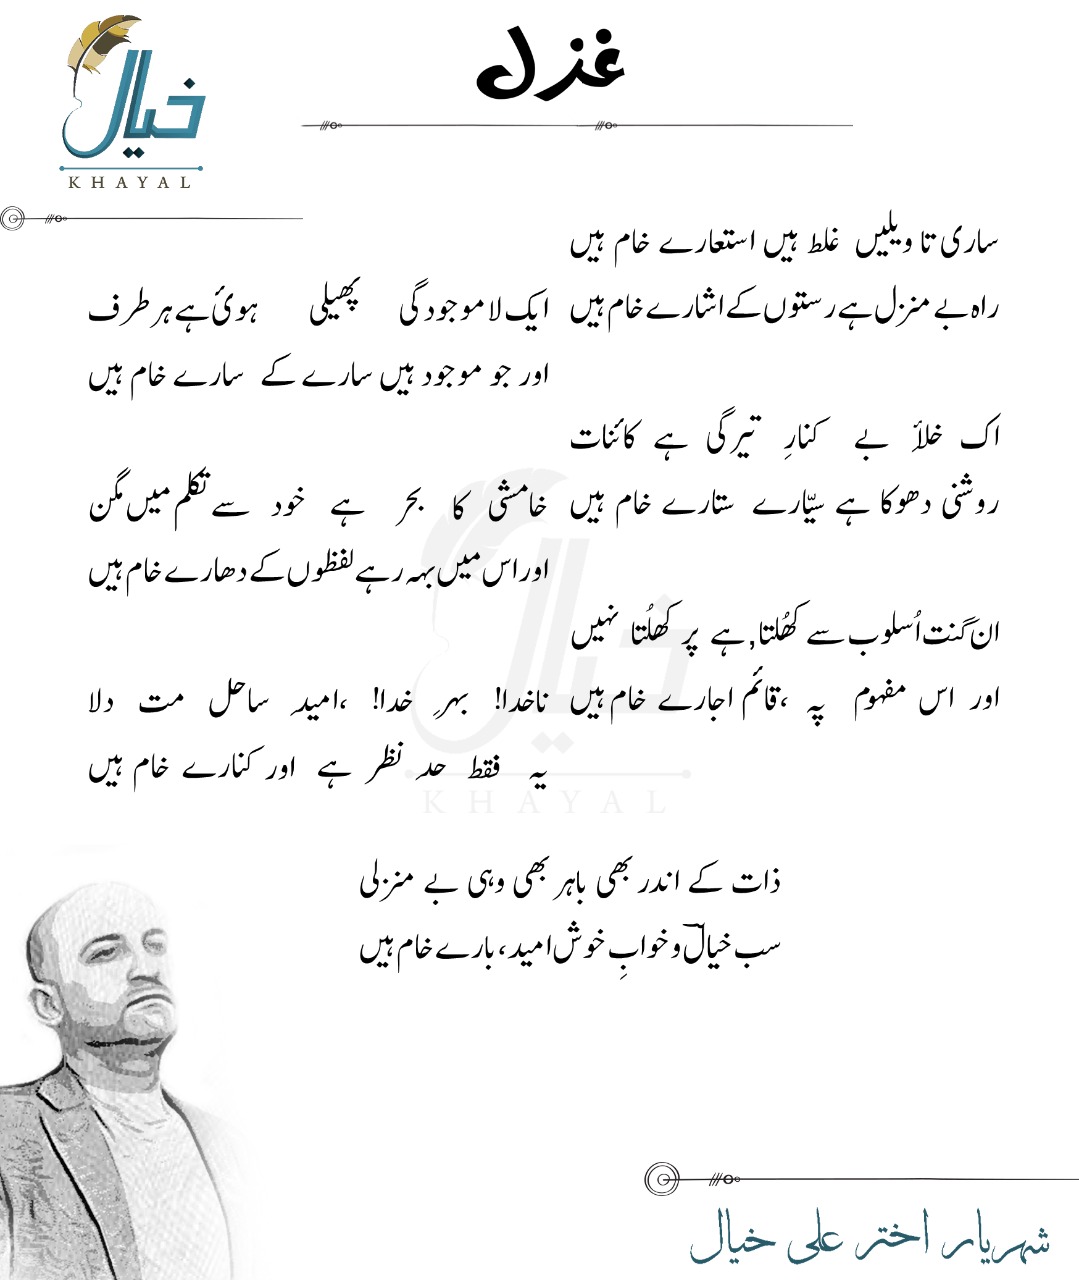 Read more about the article Sarre taweelain ghalat hn Isthary kham hn -